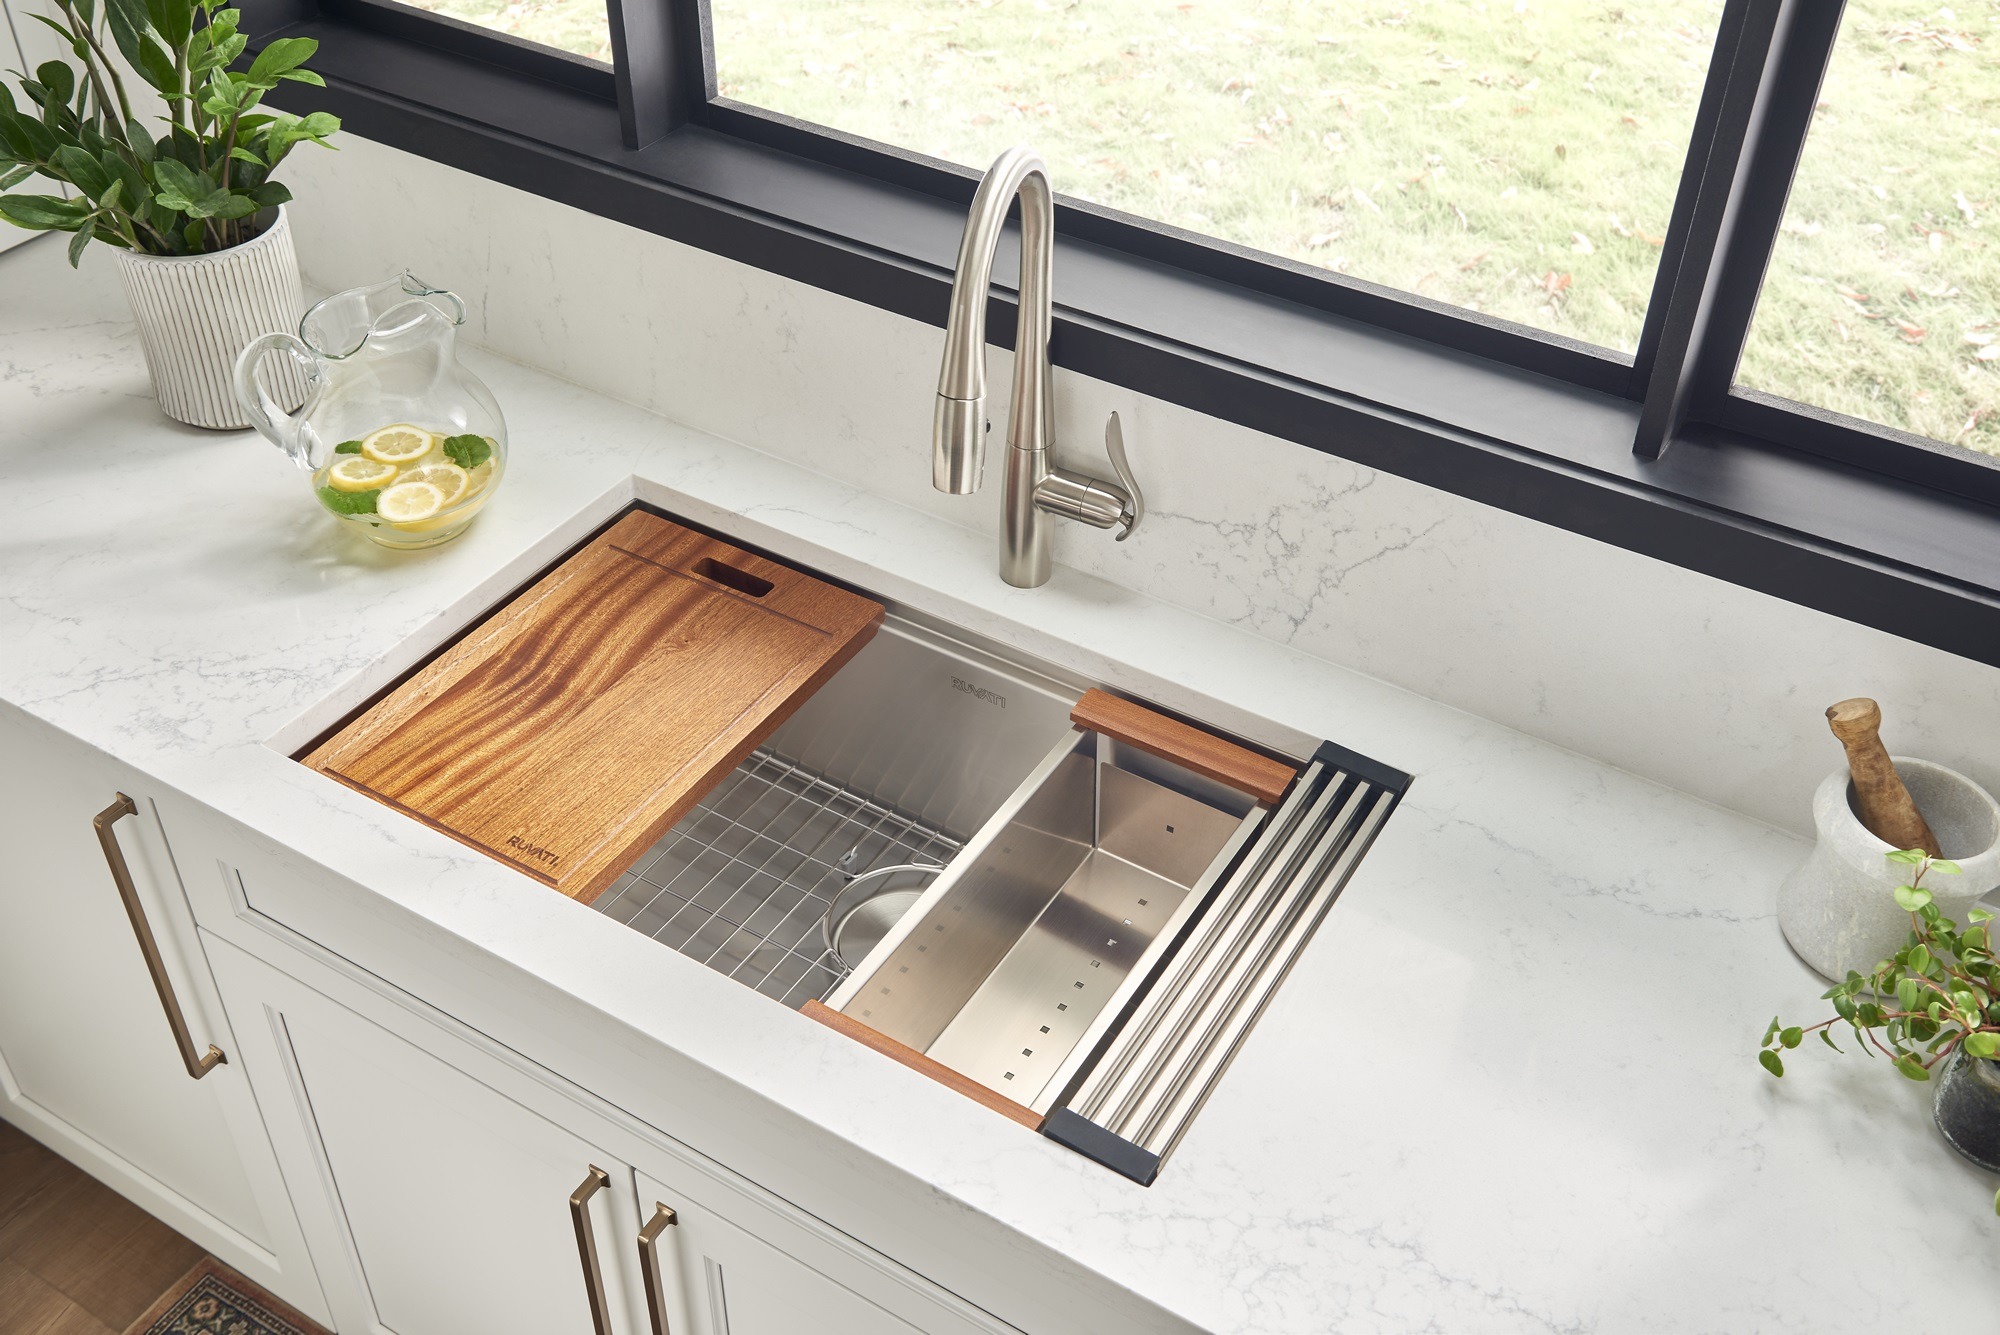 How To Buy The Right Workstation Sink For Your Kitchen